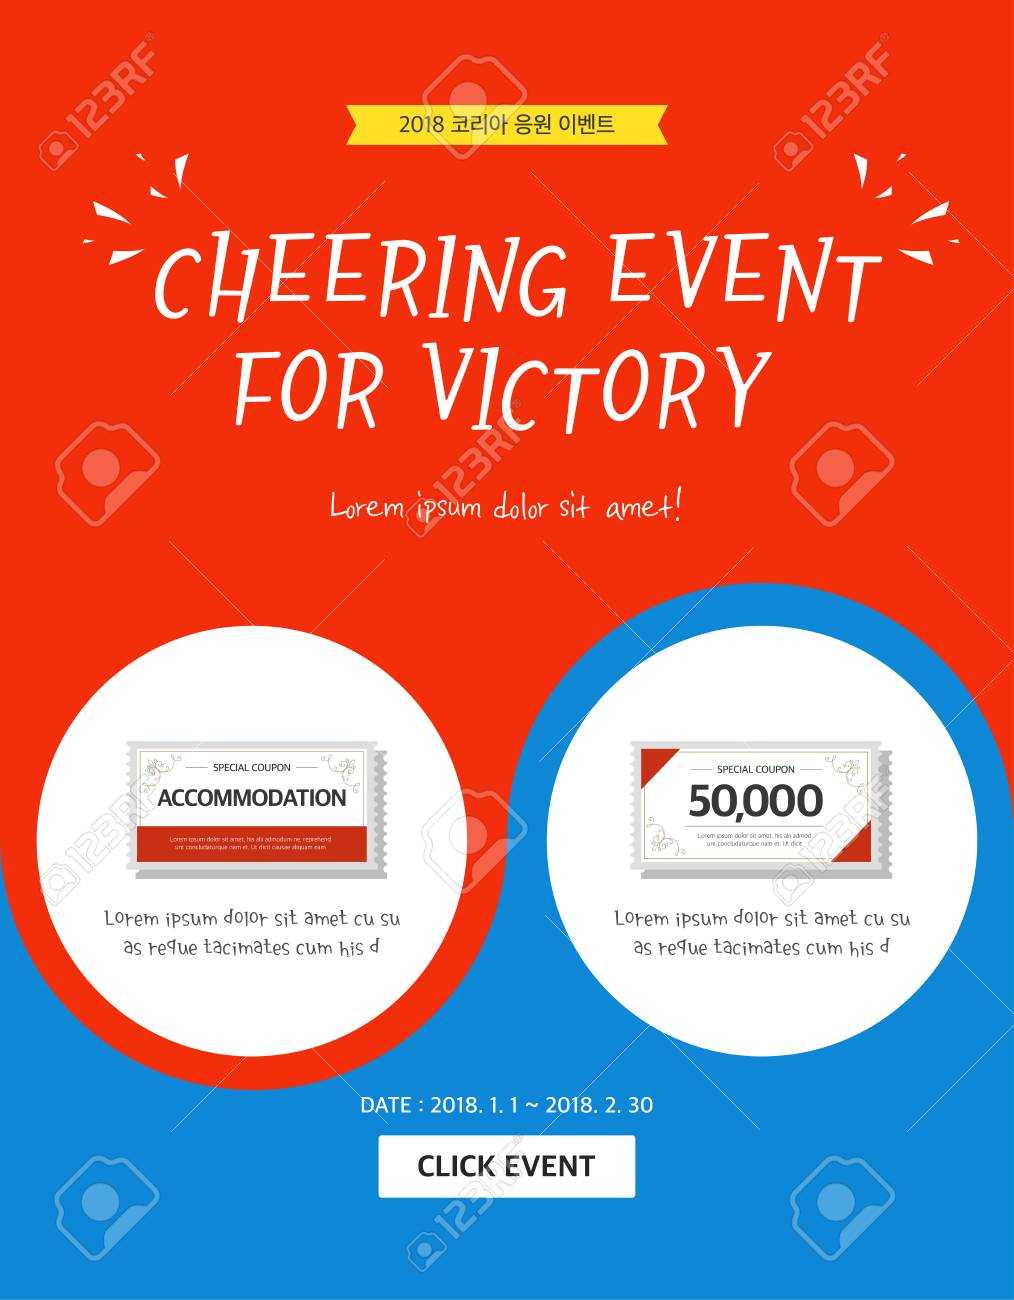 Event Banner Template – Cheering Event For Victory In Event Banner Template